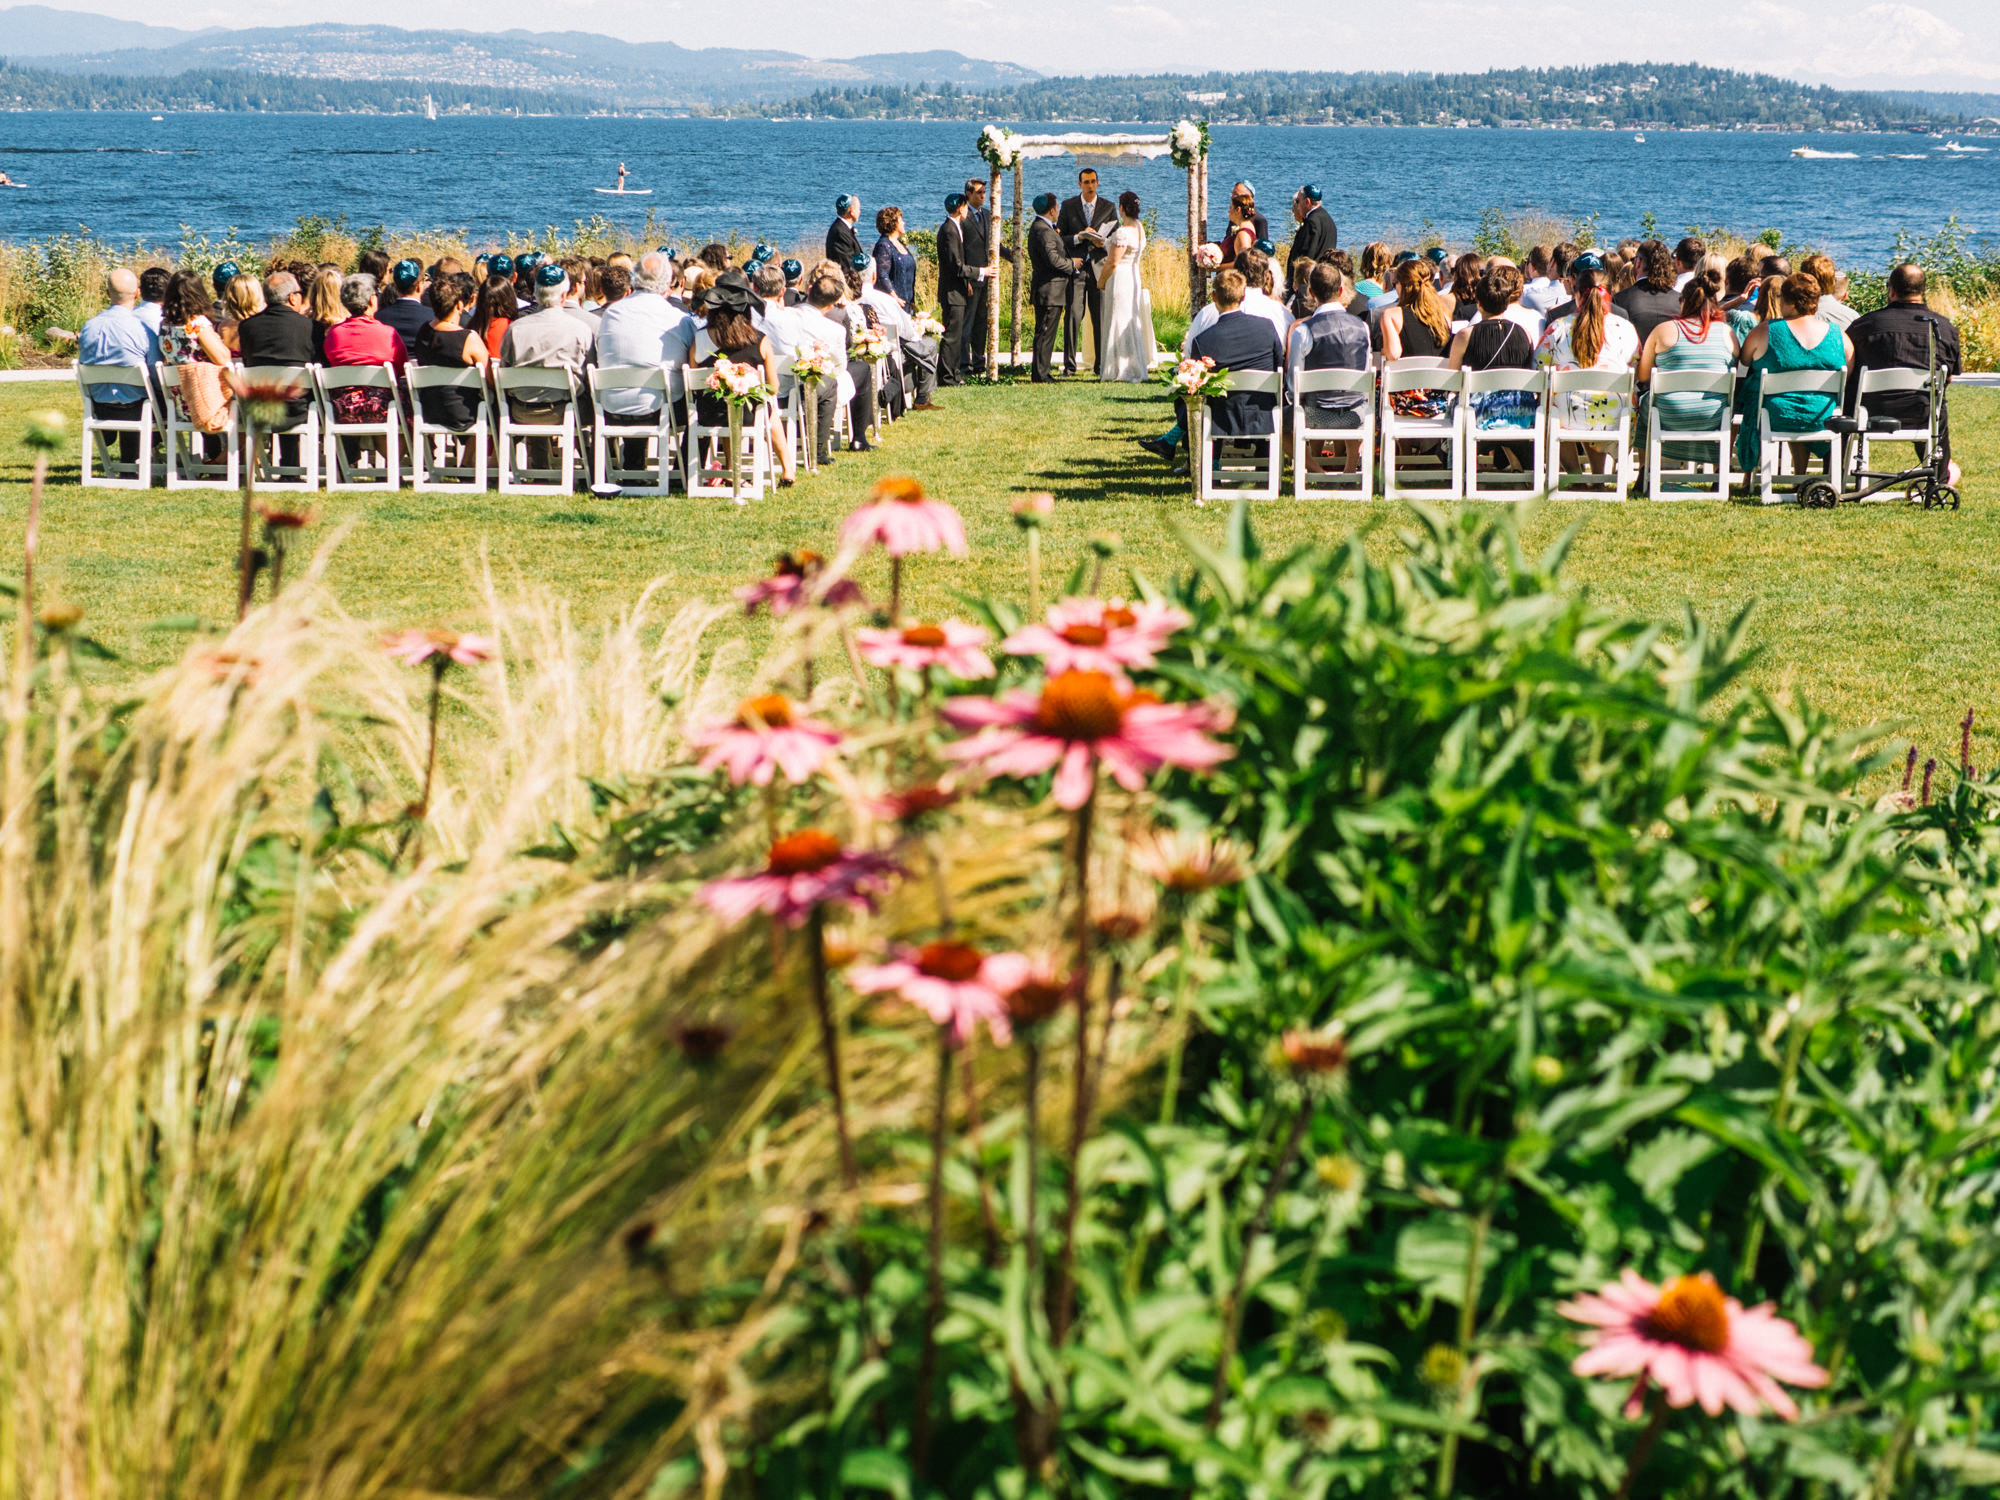 The Seattle Tennis Club features gorgeous water views and lovely landscaping on their ceremony grounds. Summer 2016. Photo by Seattle Wedding Photographers Jennifer Tai Photo Artistry.